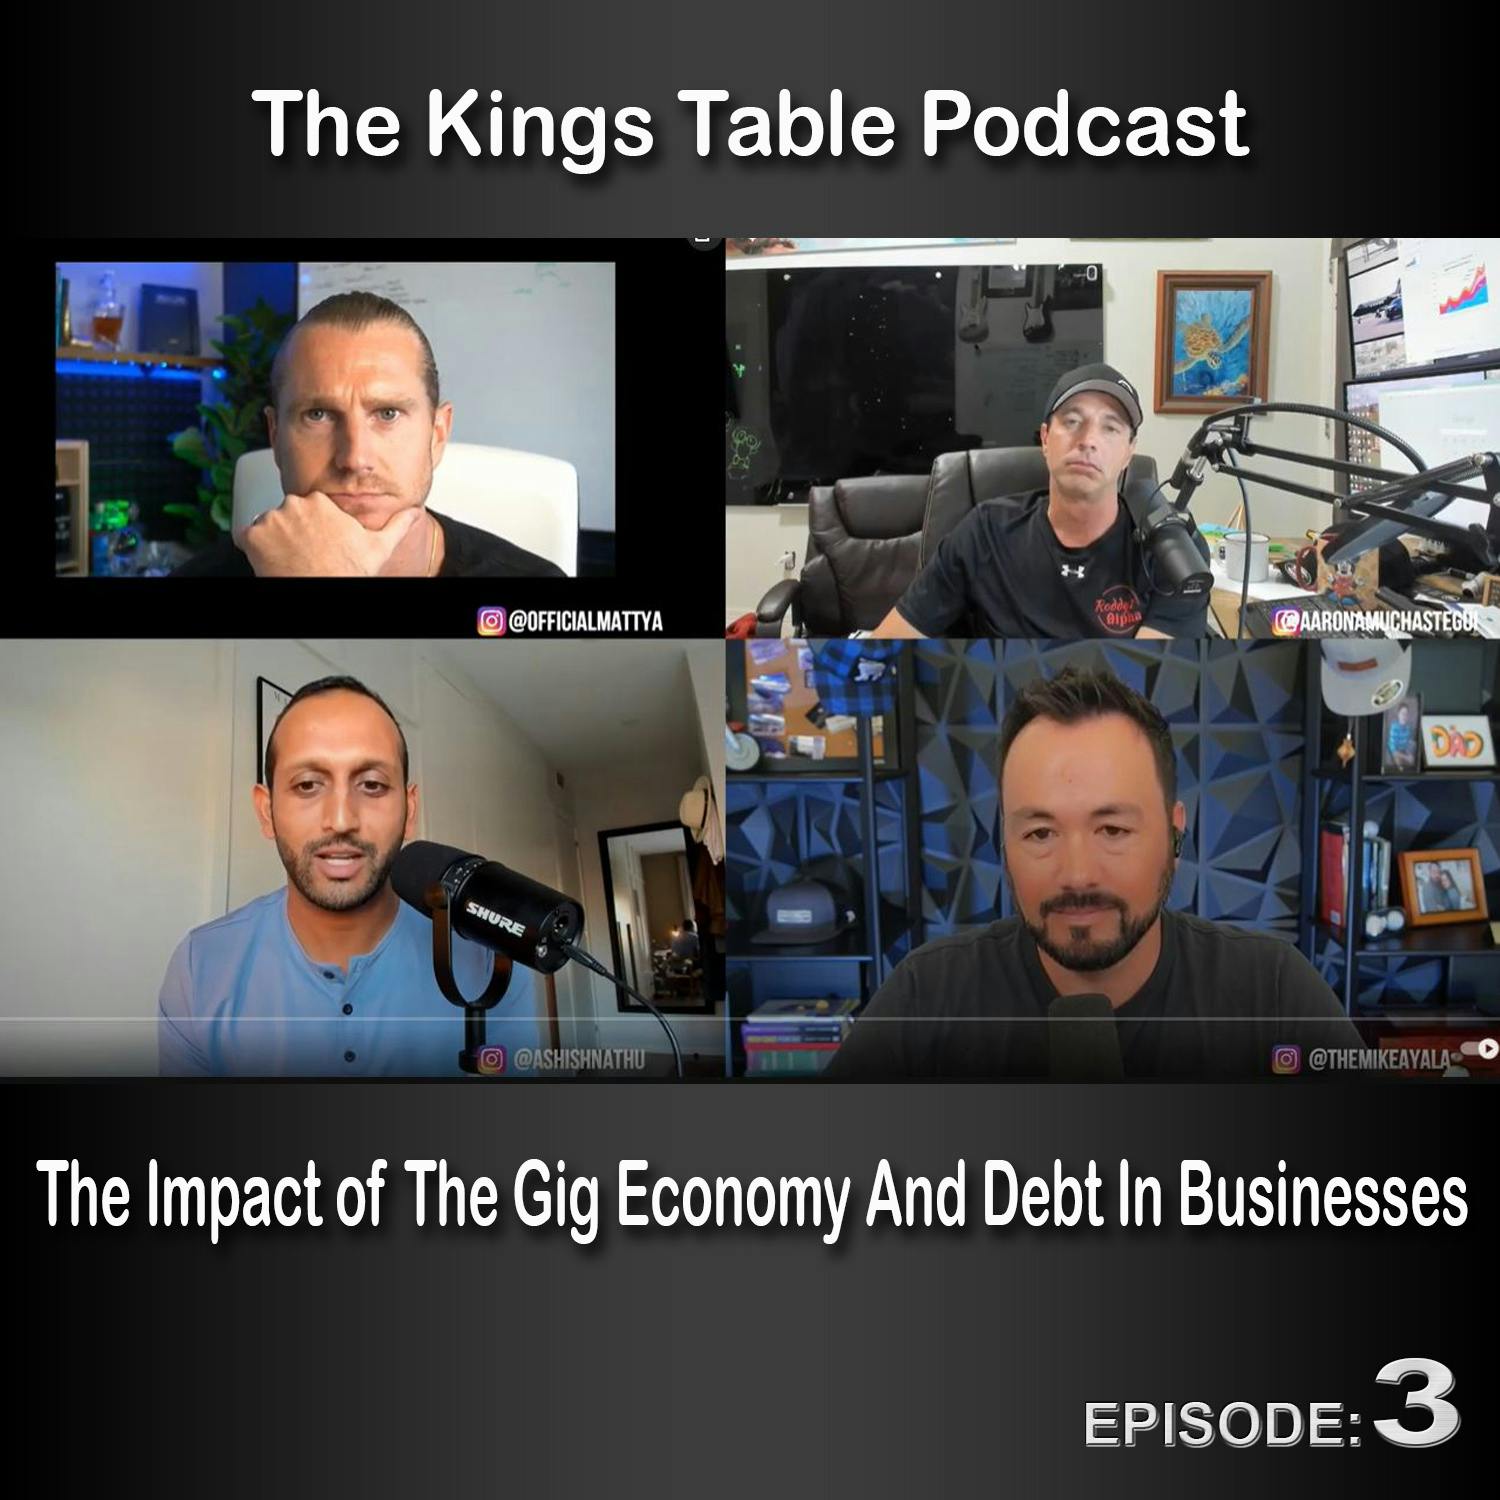 The Kings Table Episode 3: The Impact of The Gig Economy And Debt In Businesses